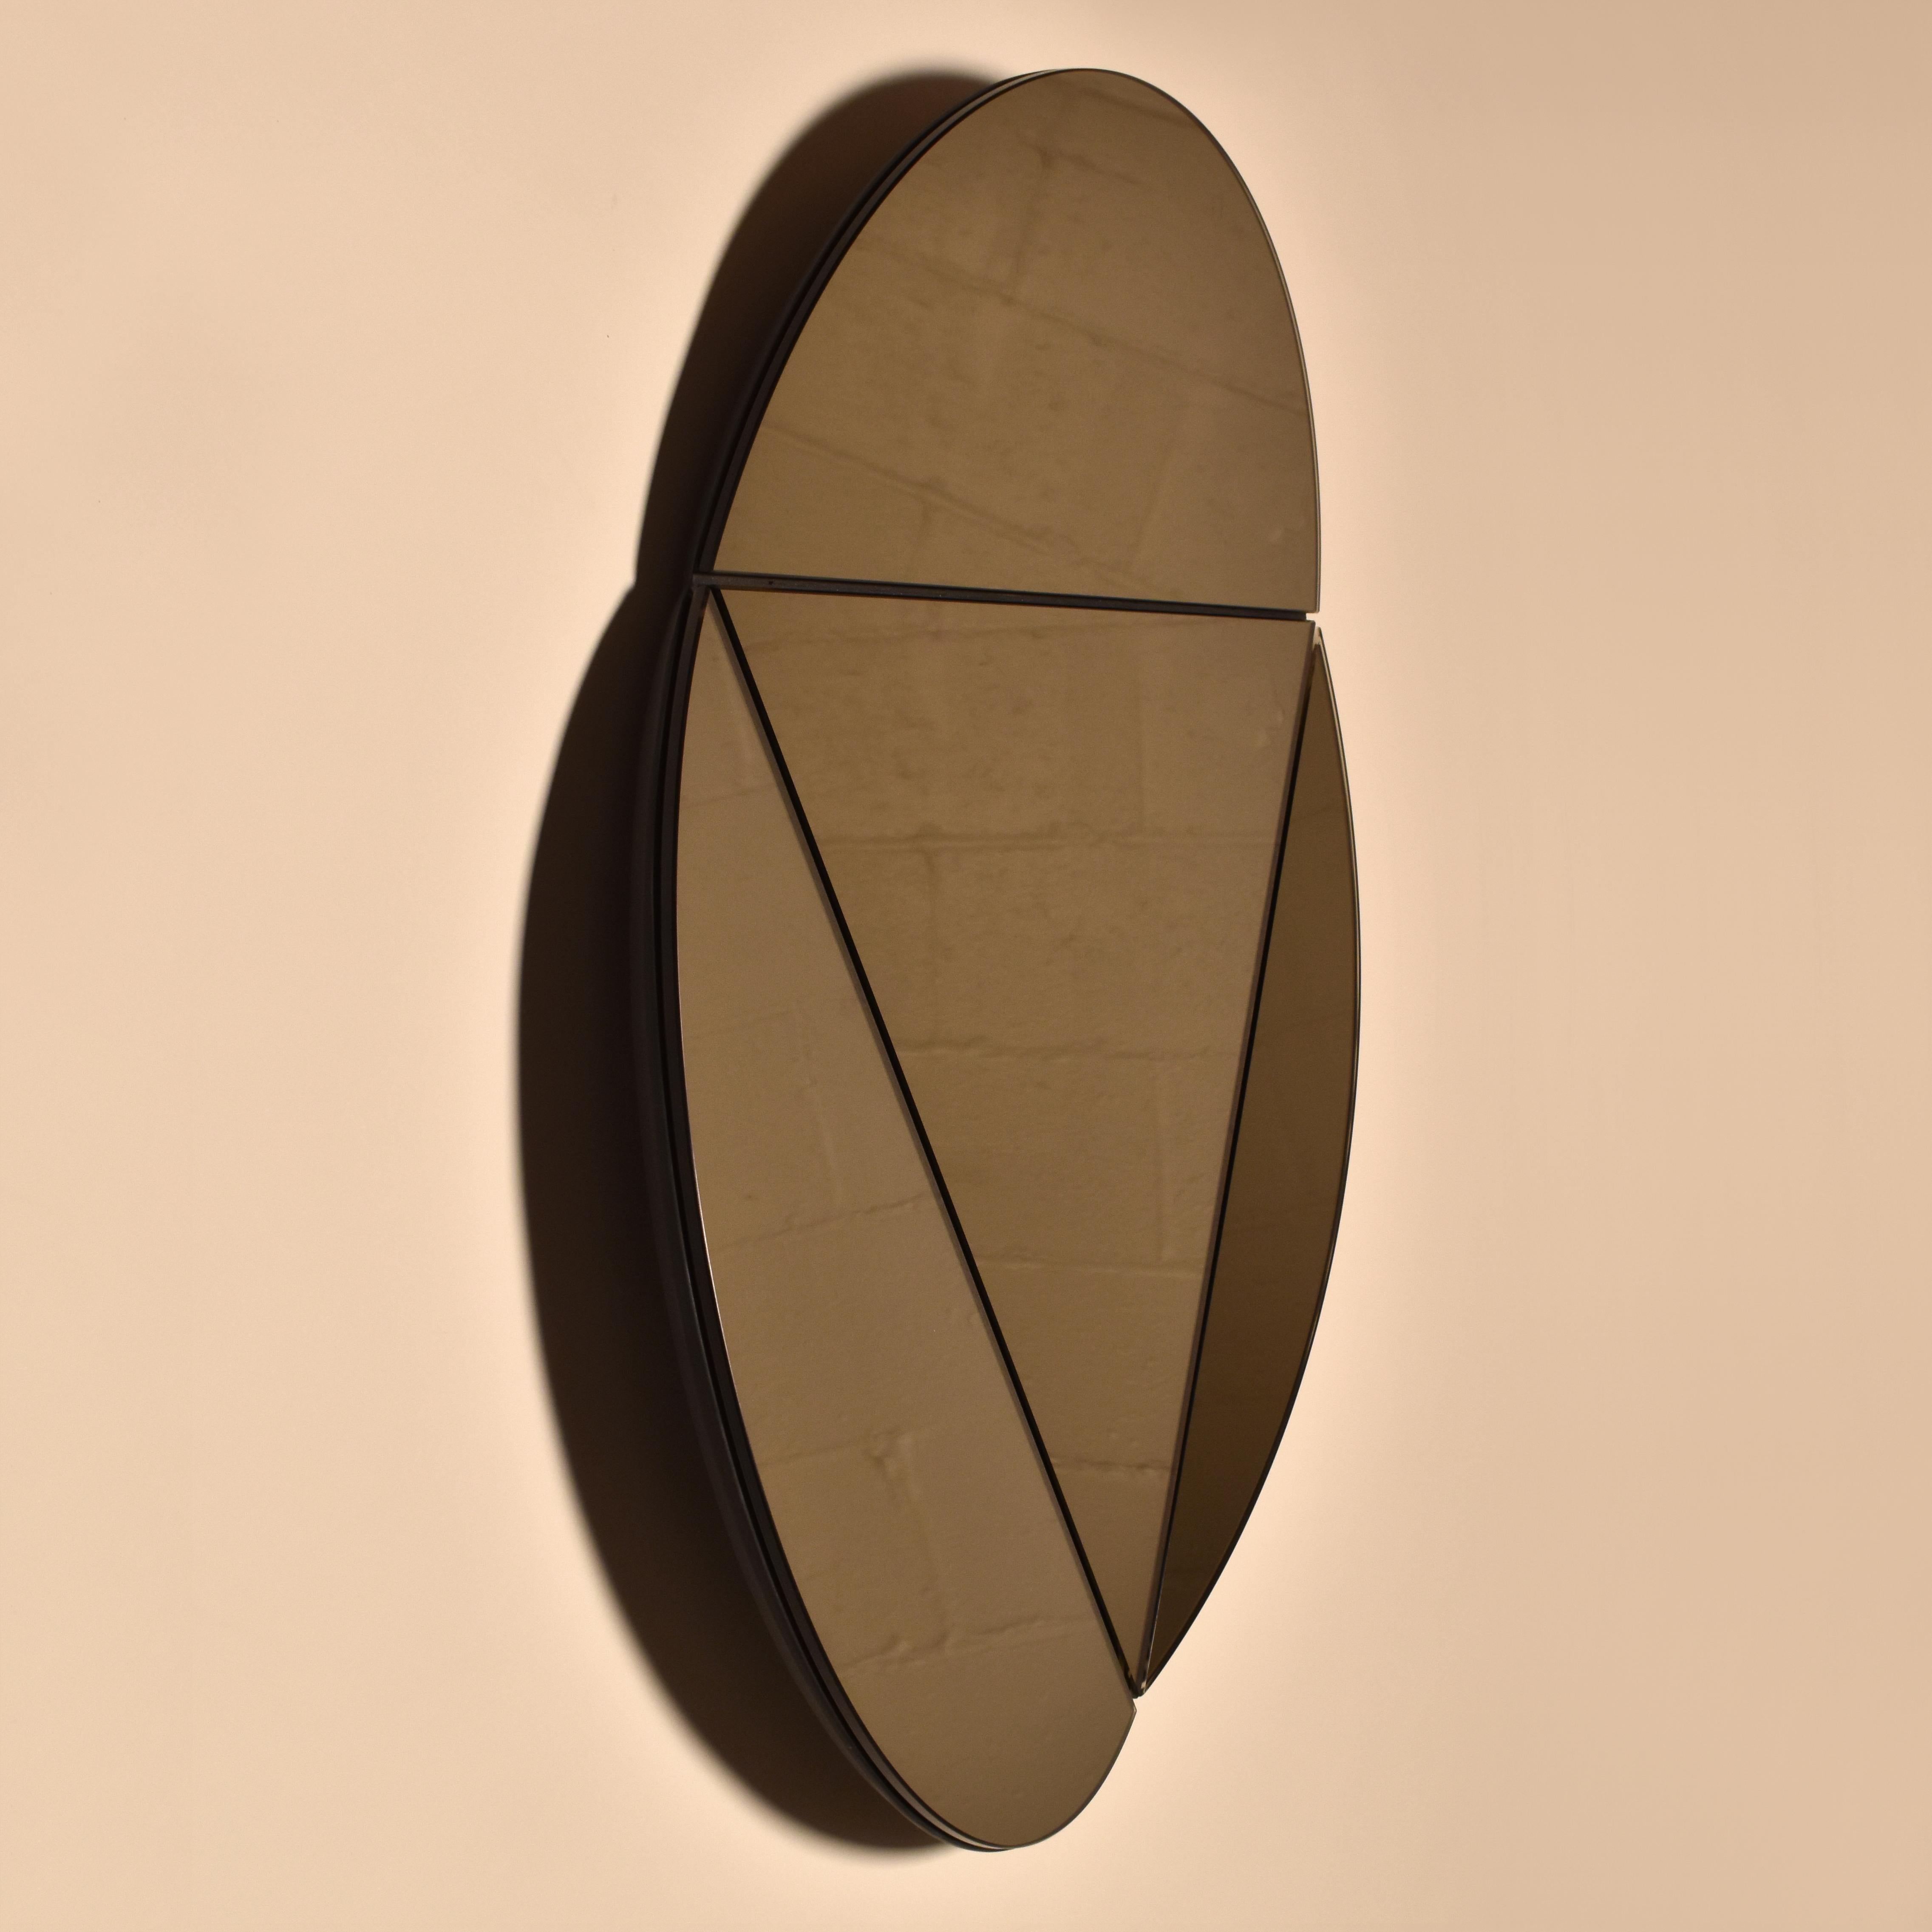 Modular mirror designed and produced by Talbot & Yoon.

The segment mirror was adapted from geometric studies produced during the development of the connection brackets between the arches of our vault light.

The initial ‘serious’ study project